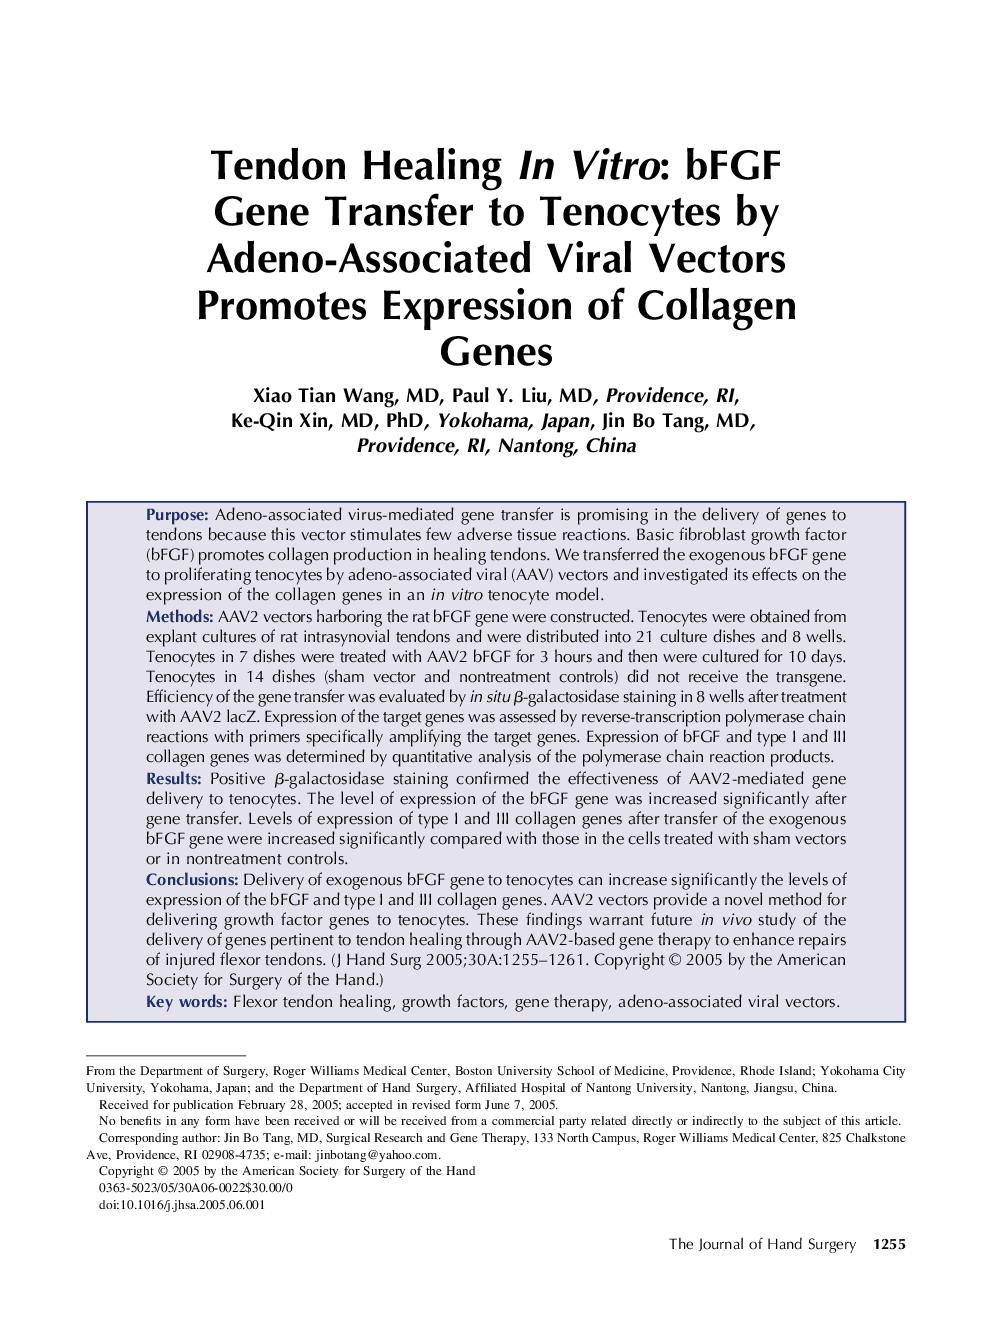 Tendon Healing In Vitro: bFGF Gene Transfer to Tenocytes by Adeno-Associated Viral Vectors Promotes Expression of Collagen Genes